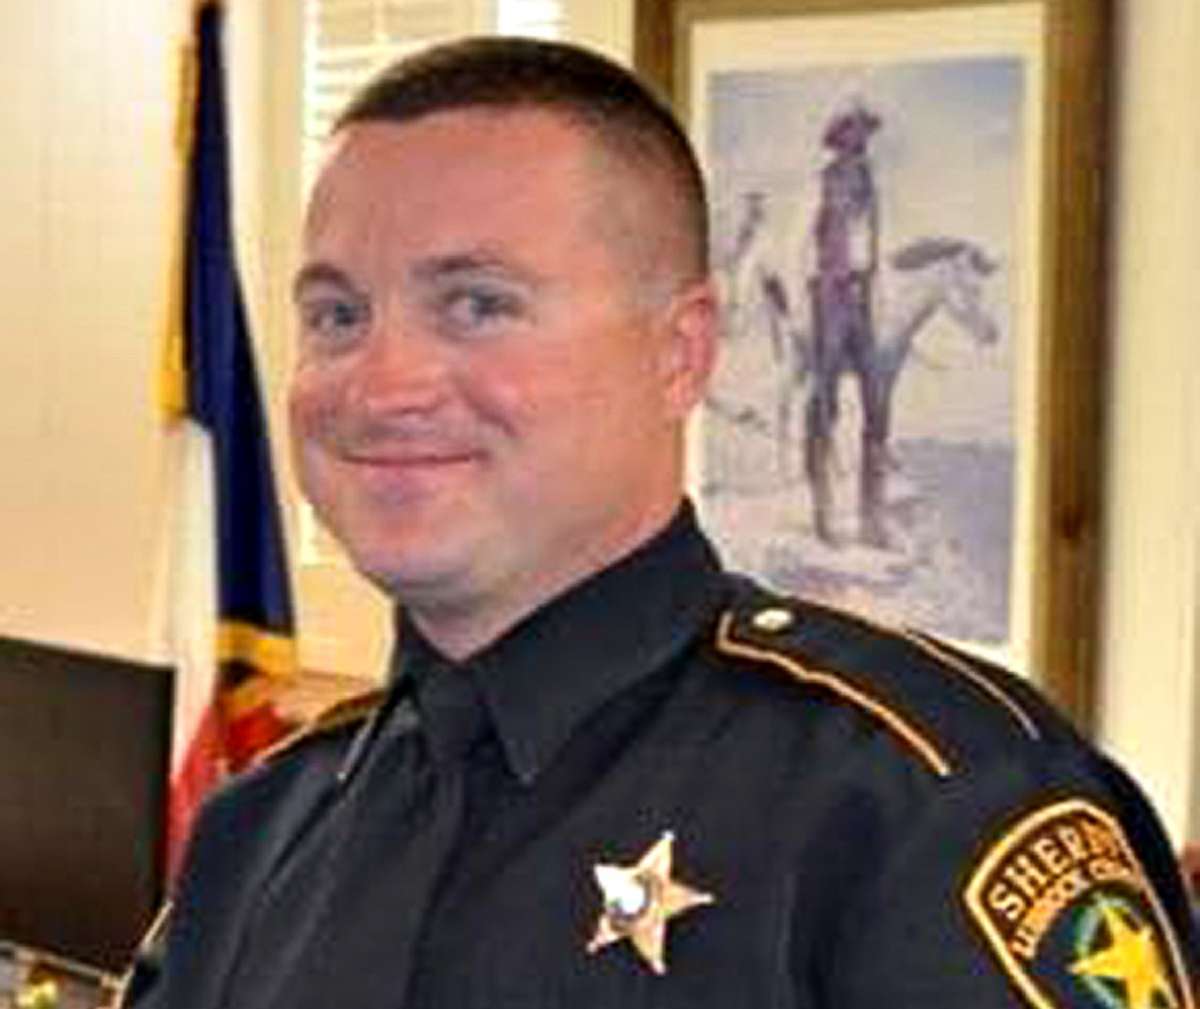 PHOTO: Sergeant Josh Bartlett was shot and killed during a barricade at a home in the 1100 block of 10th Street in Levelland, Texas, July 15, 2021.